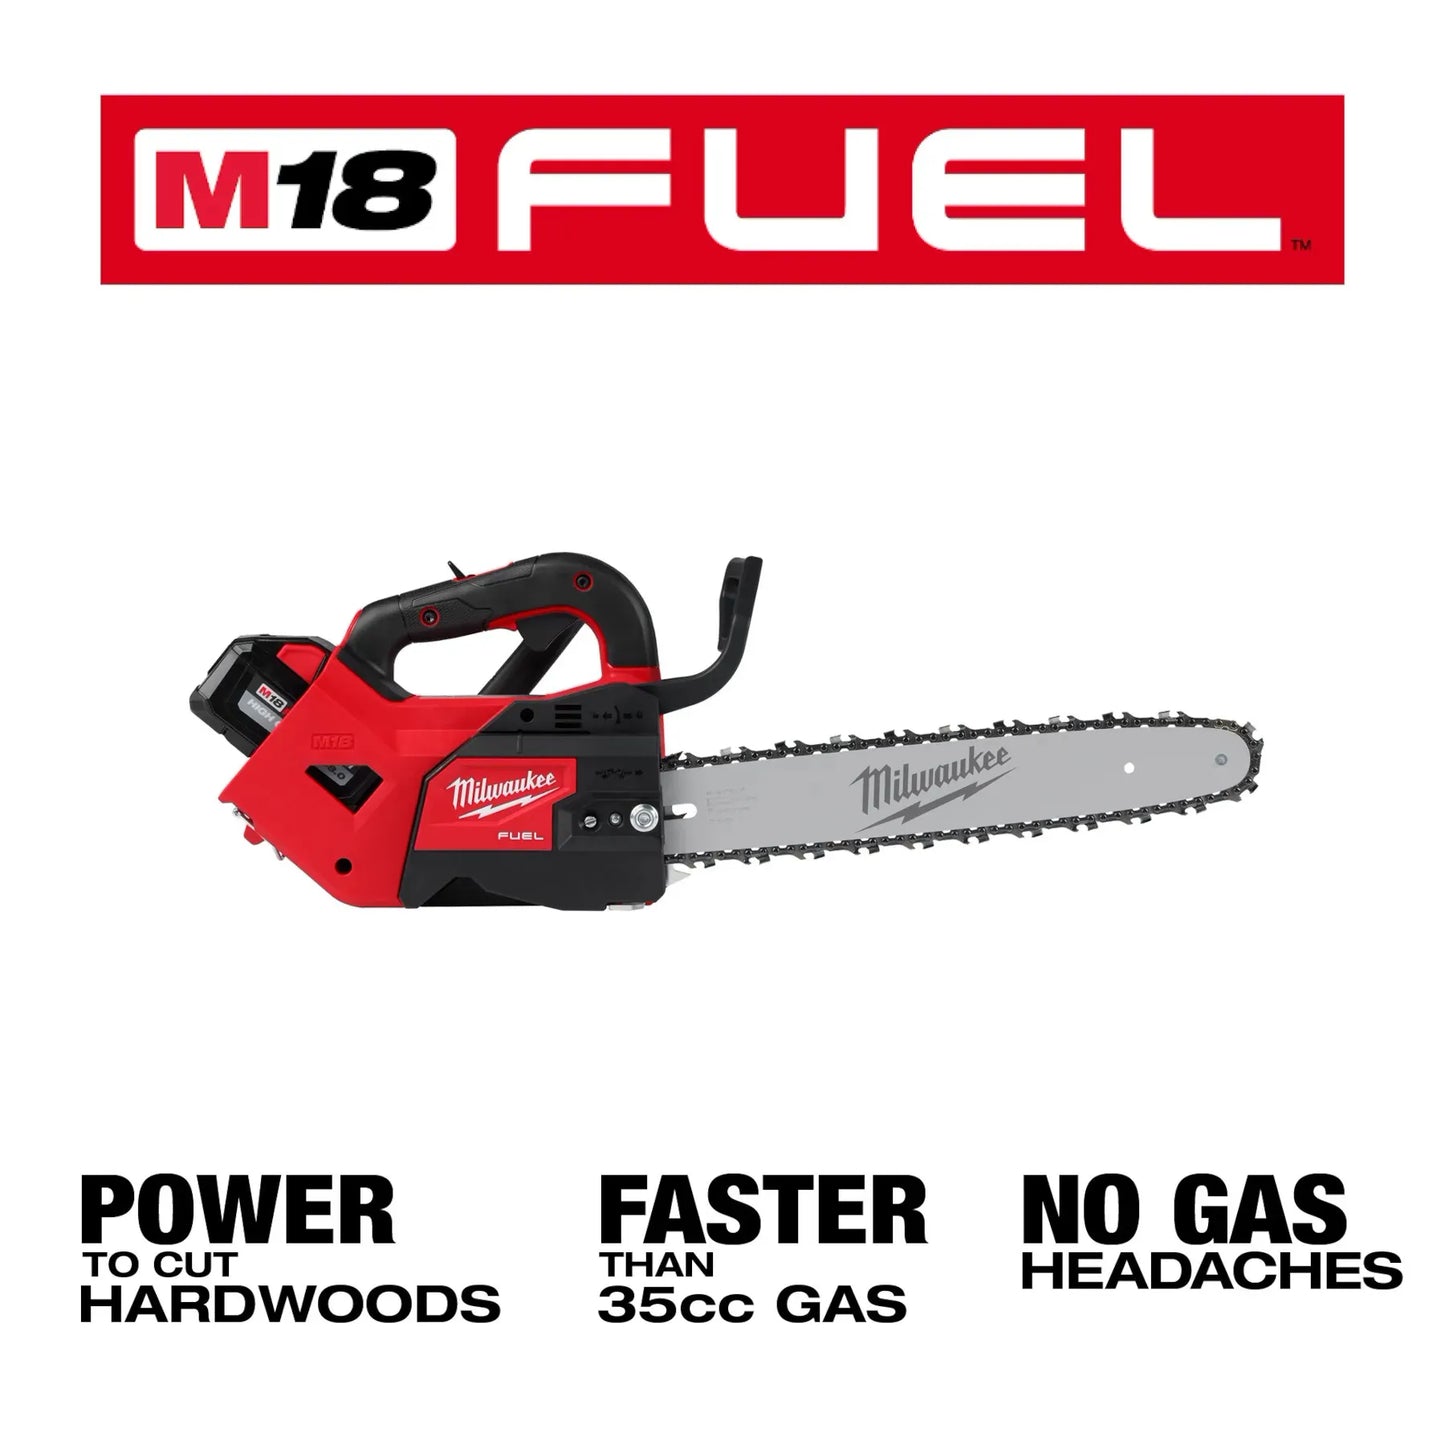 M18 FUEL™ 14" Top Handle Chainsaw Kit